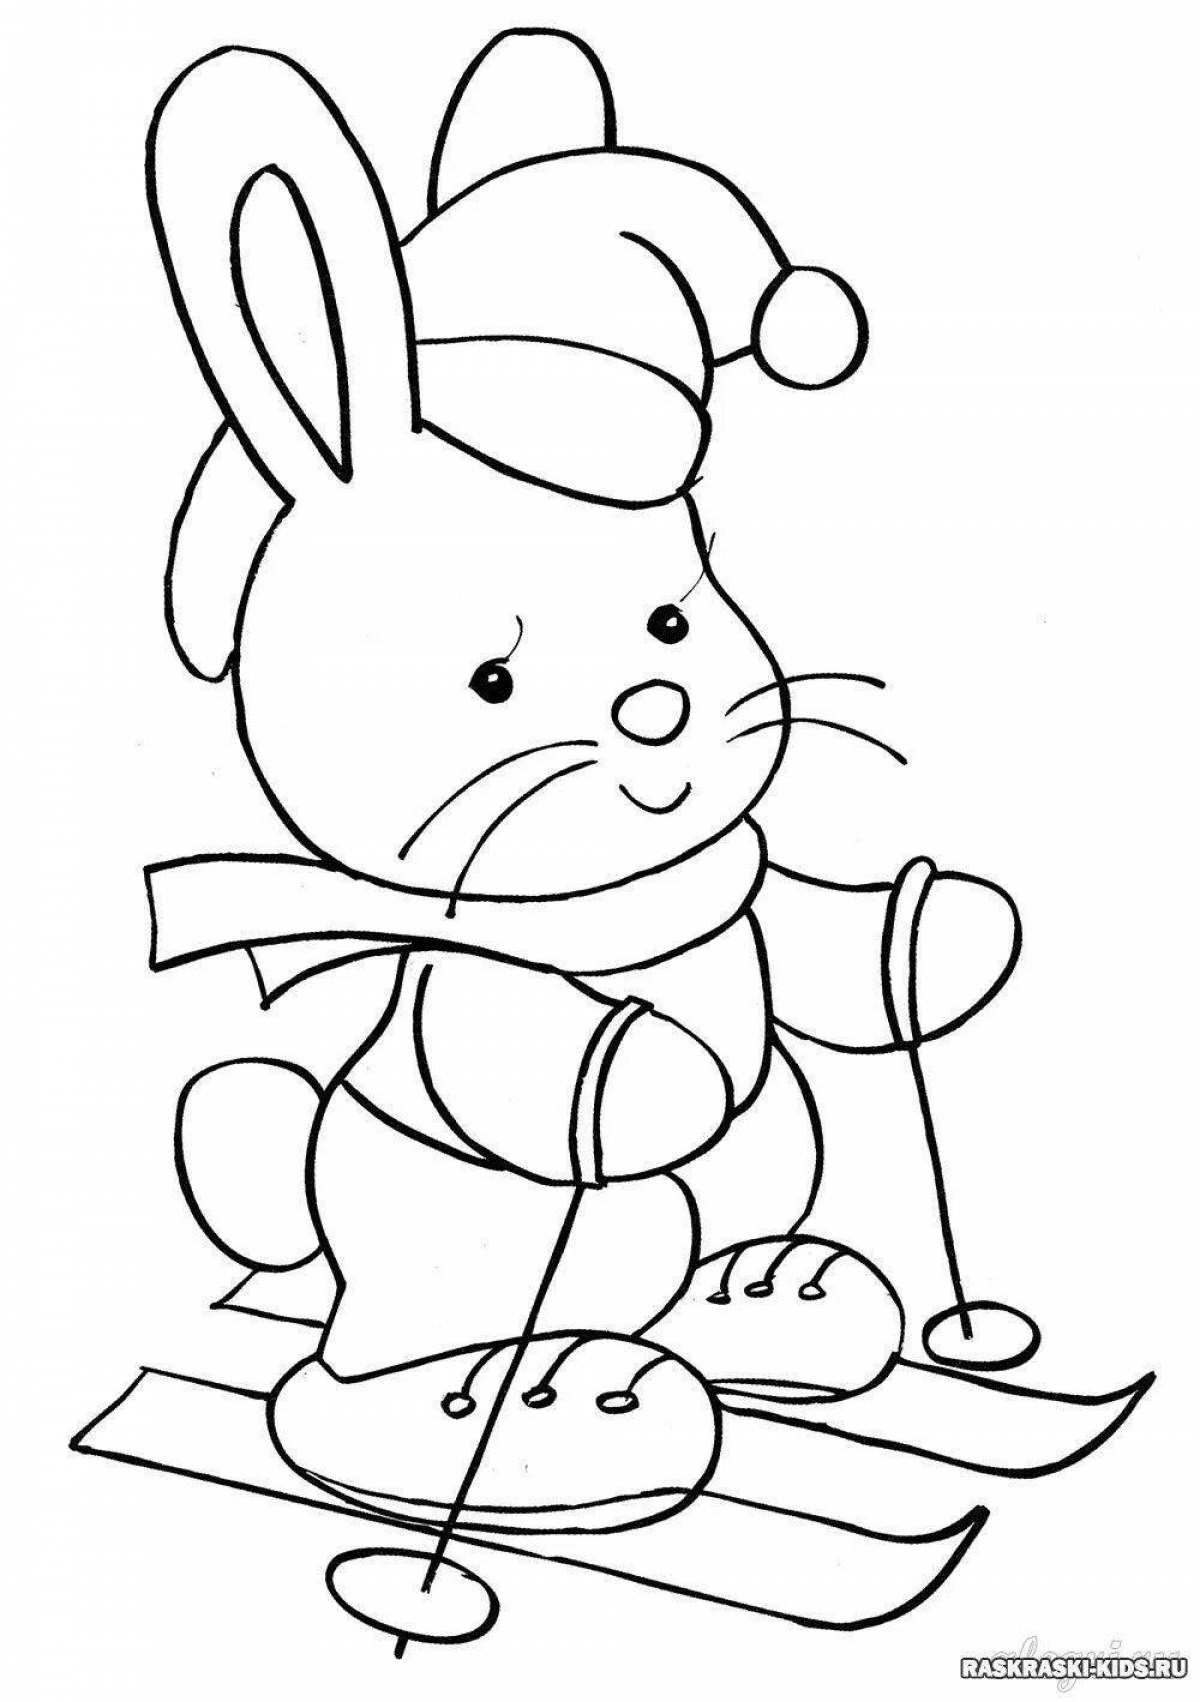 Exquisite winter coloring book for children 2-3 years old